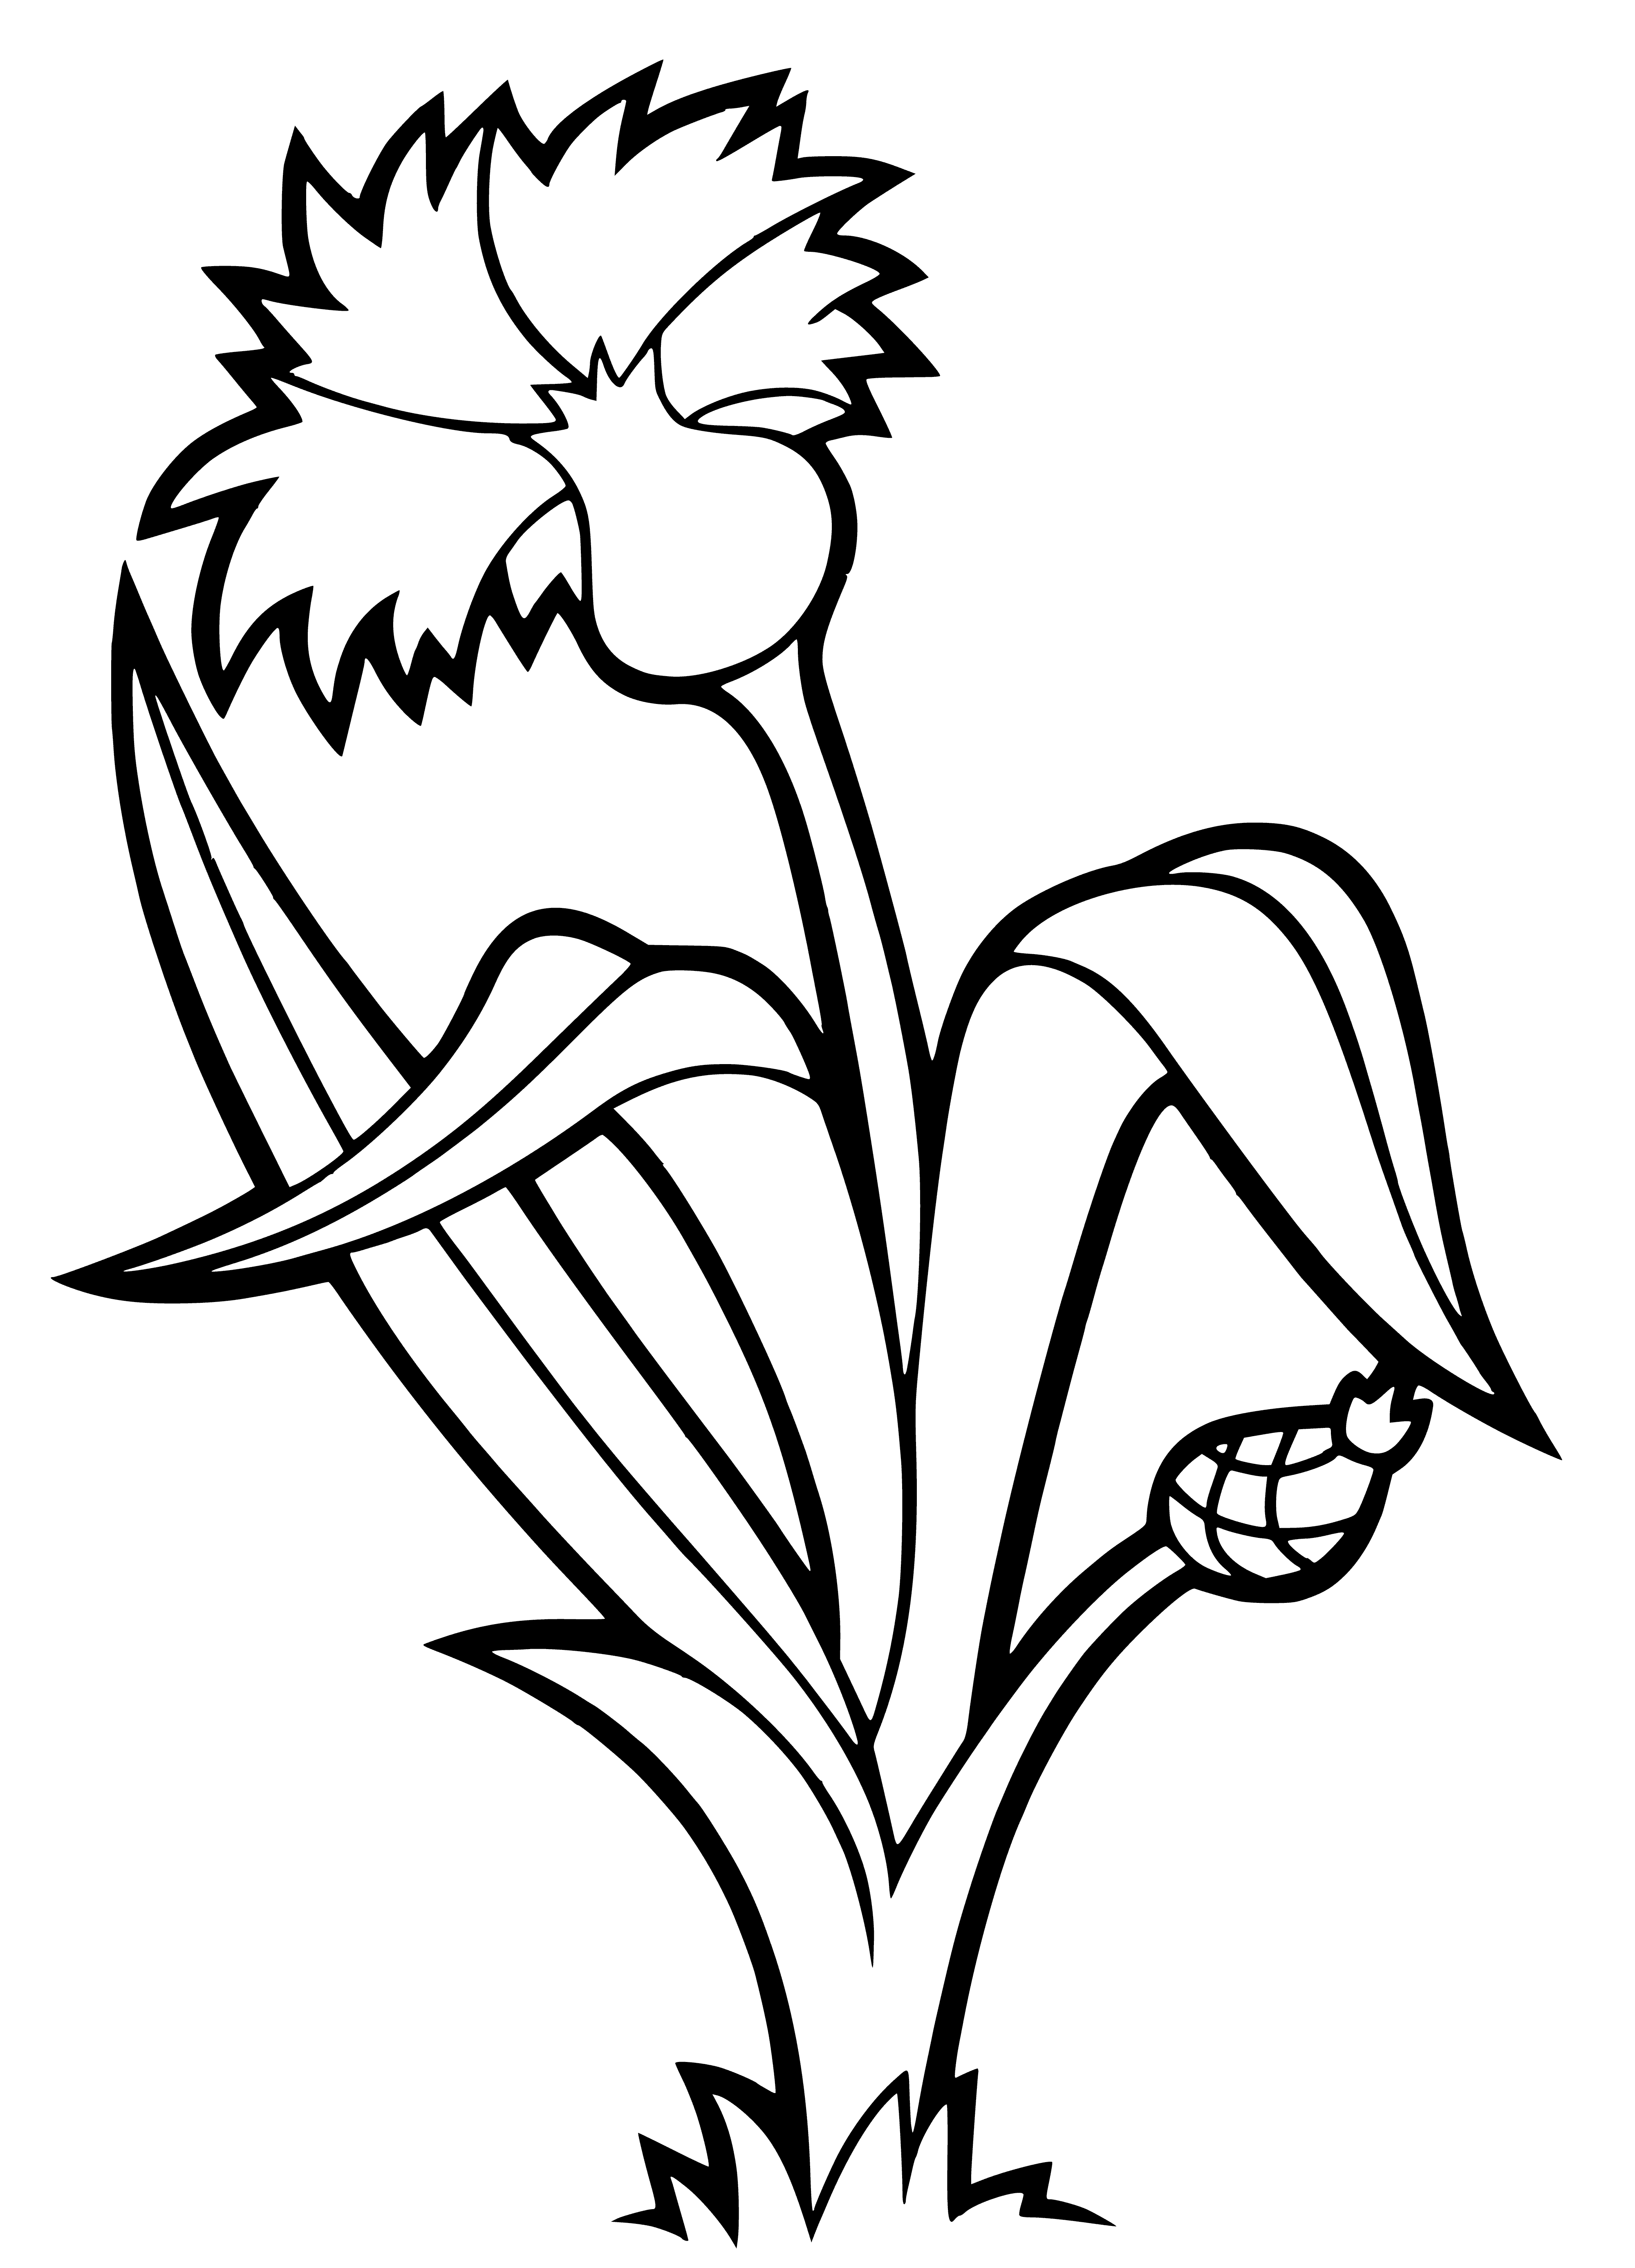 coloring page: Blue flower w/ yellow center, ruffled petals w/ white stripe, green stem & small leaves.